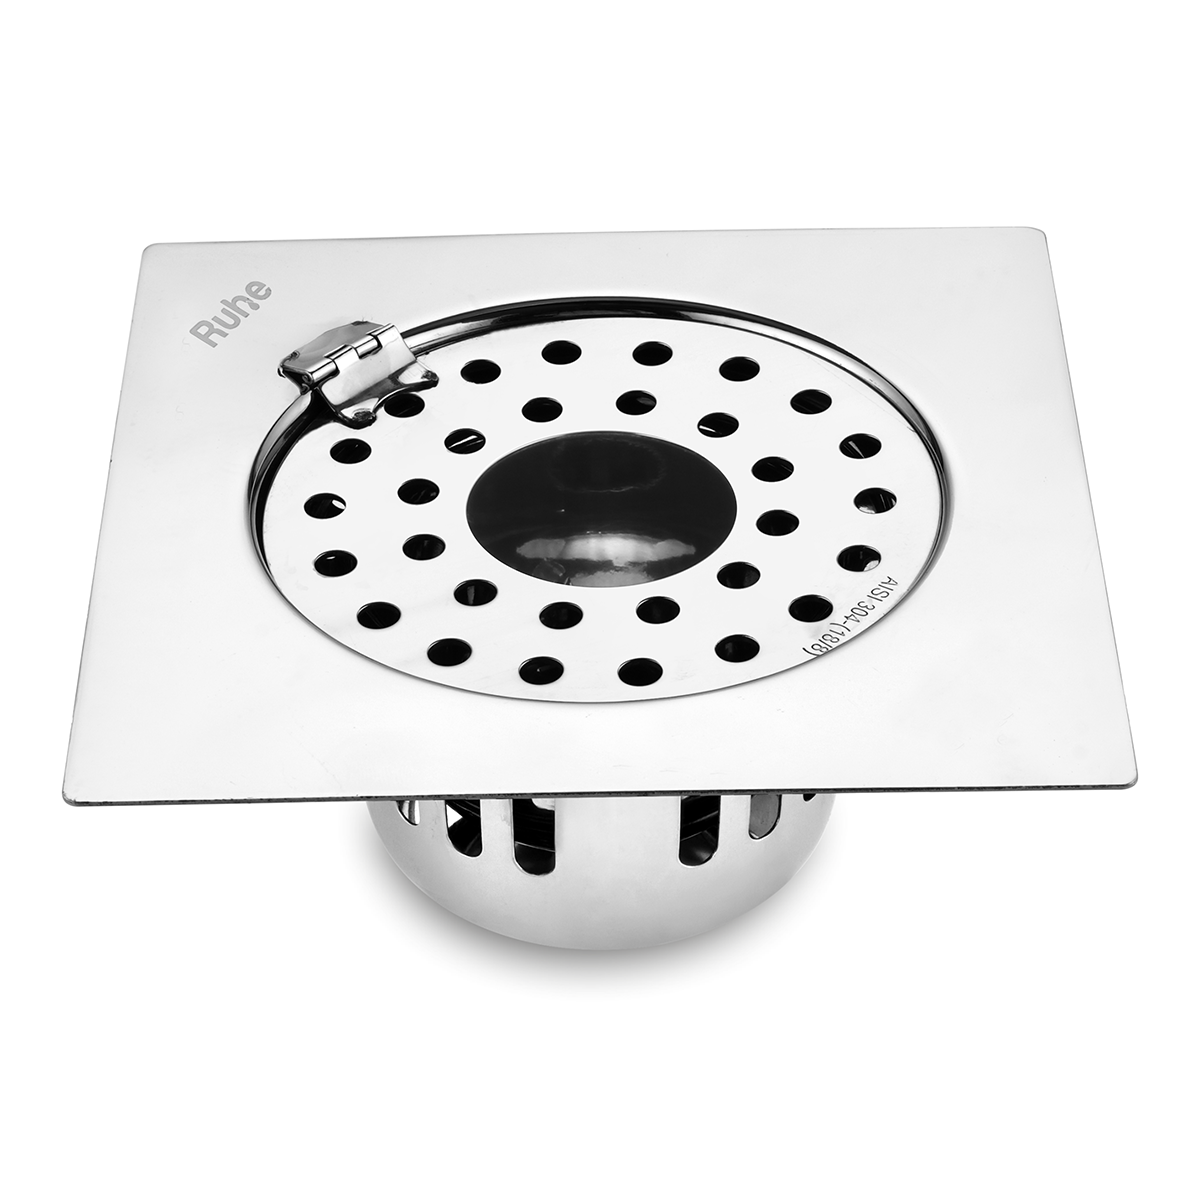 Air Square Flat Cut Floor Drain (6 x 6 Inches) with Hinge, Hole and Cockroach Trap (304 Grade)